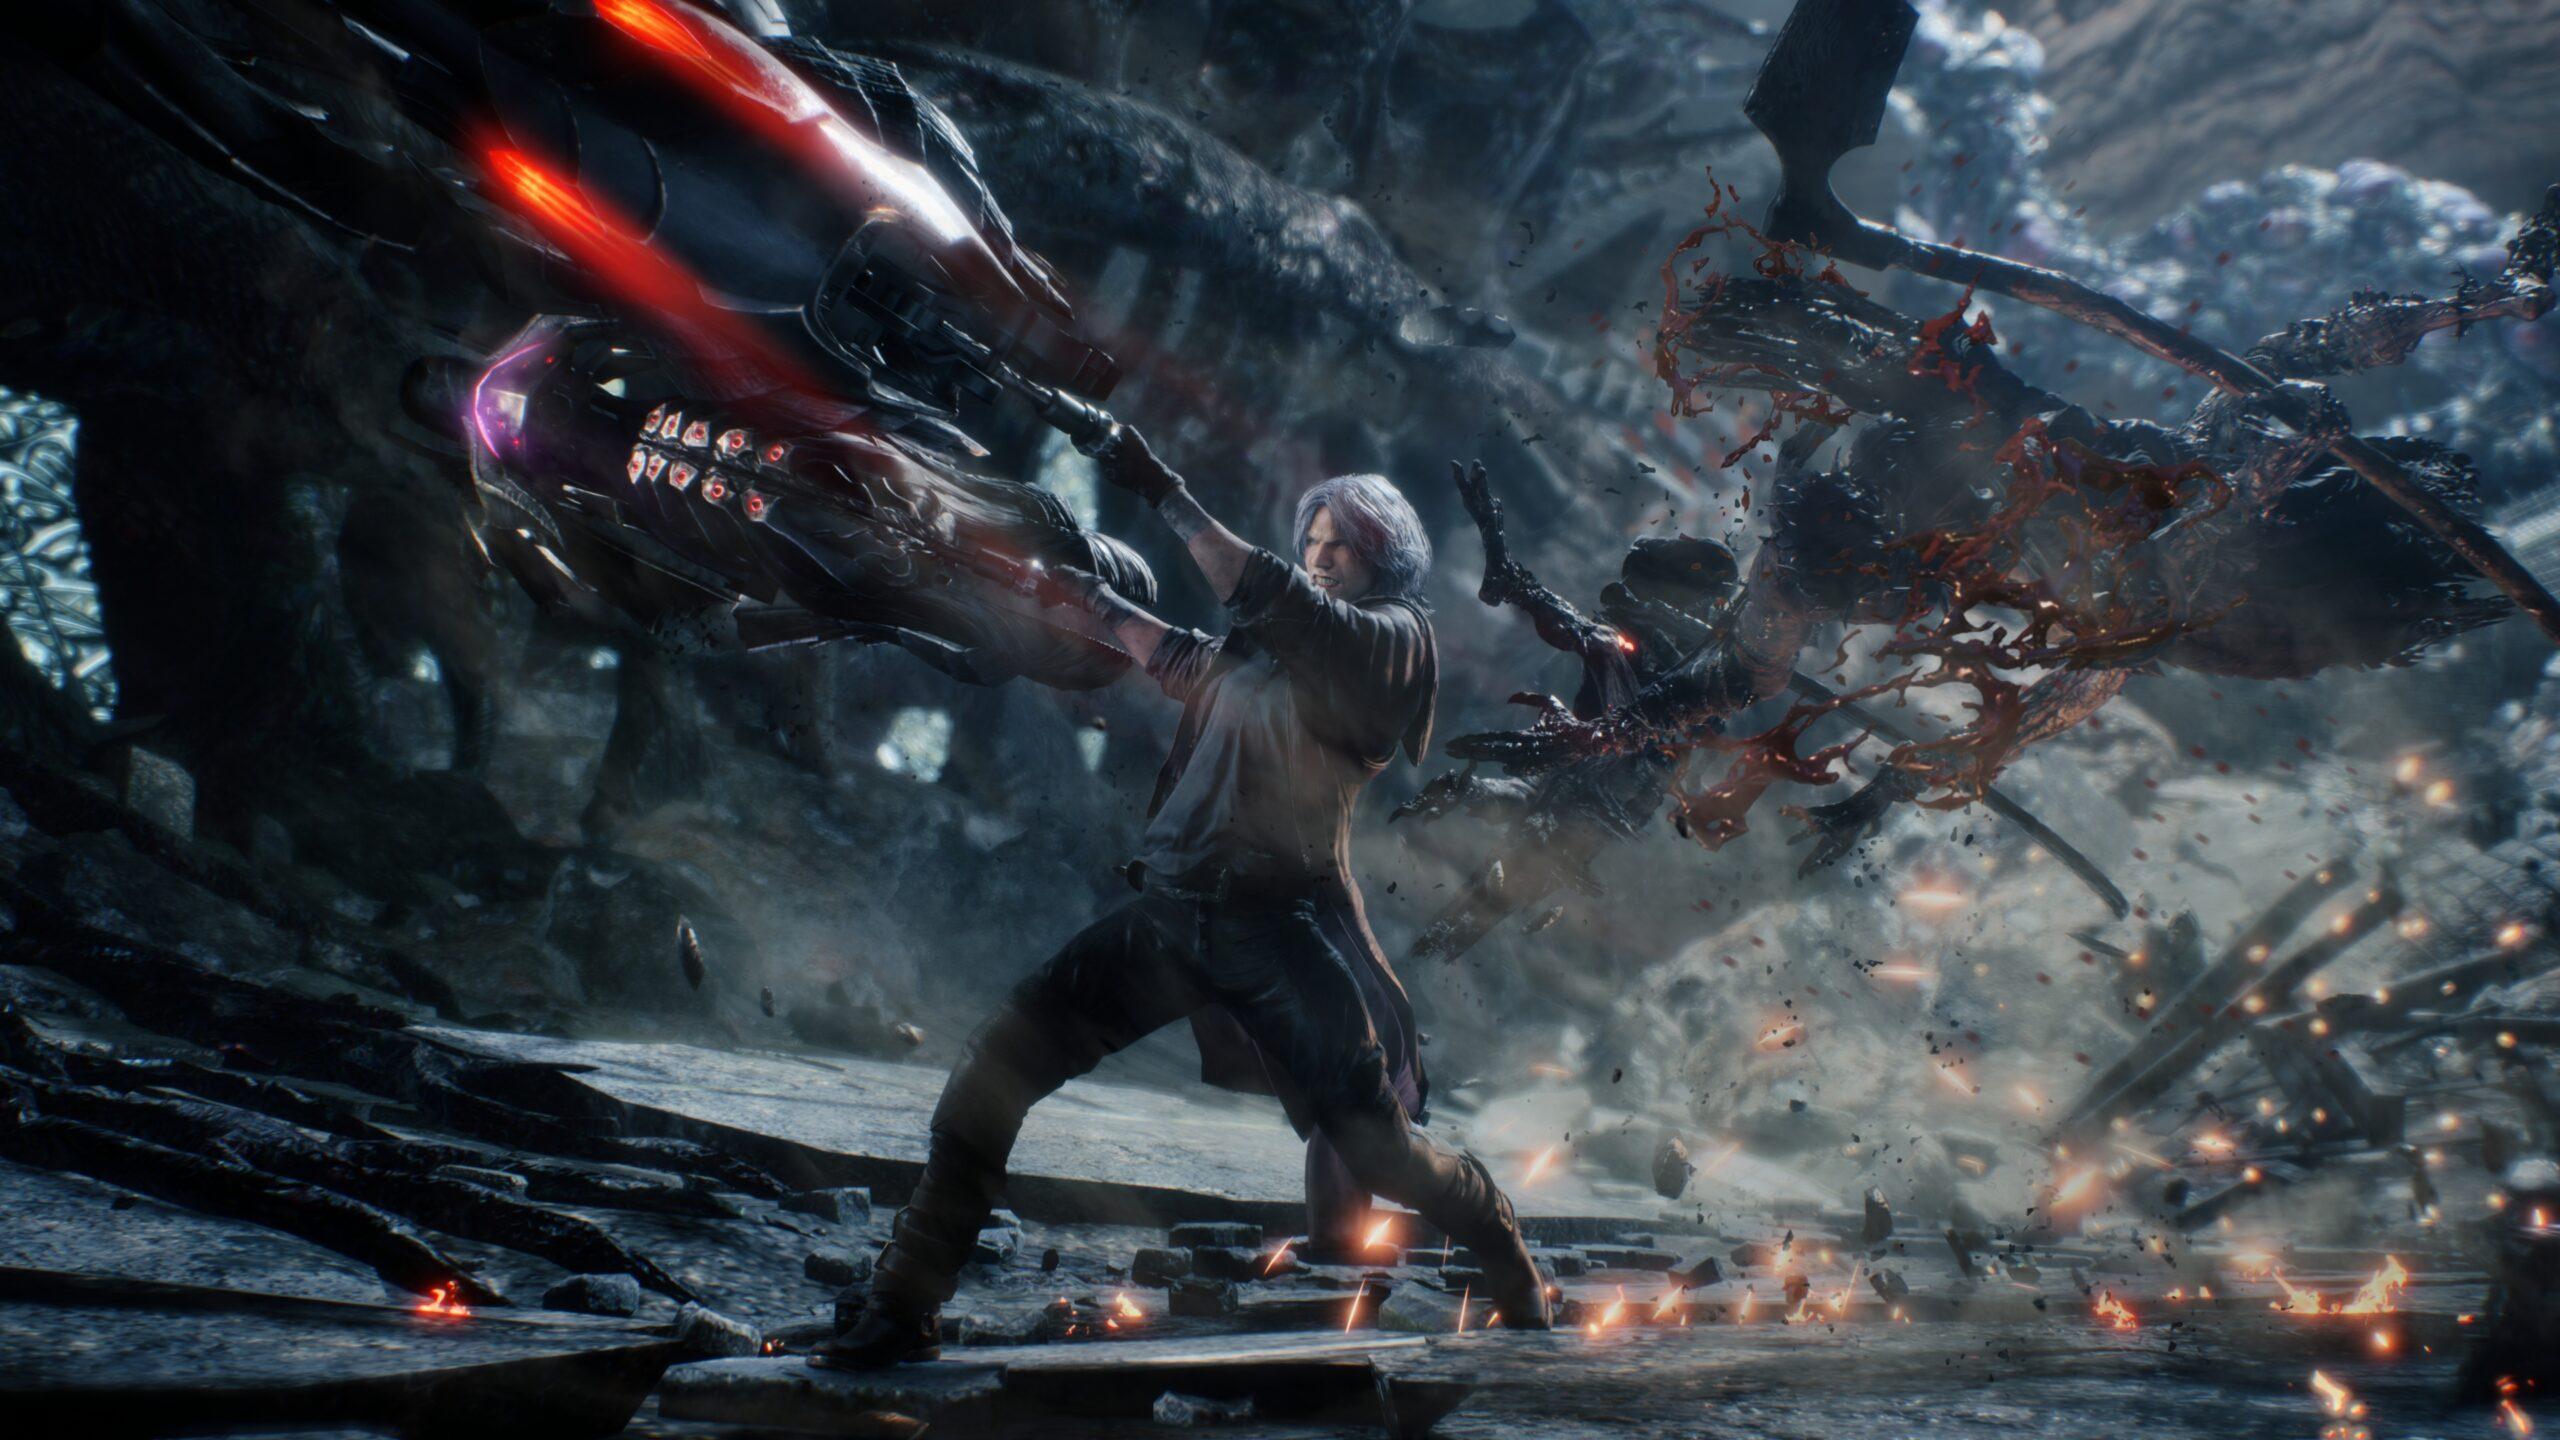 Devil May Cry 5 gameplay shows Dante hitting demons with his